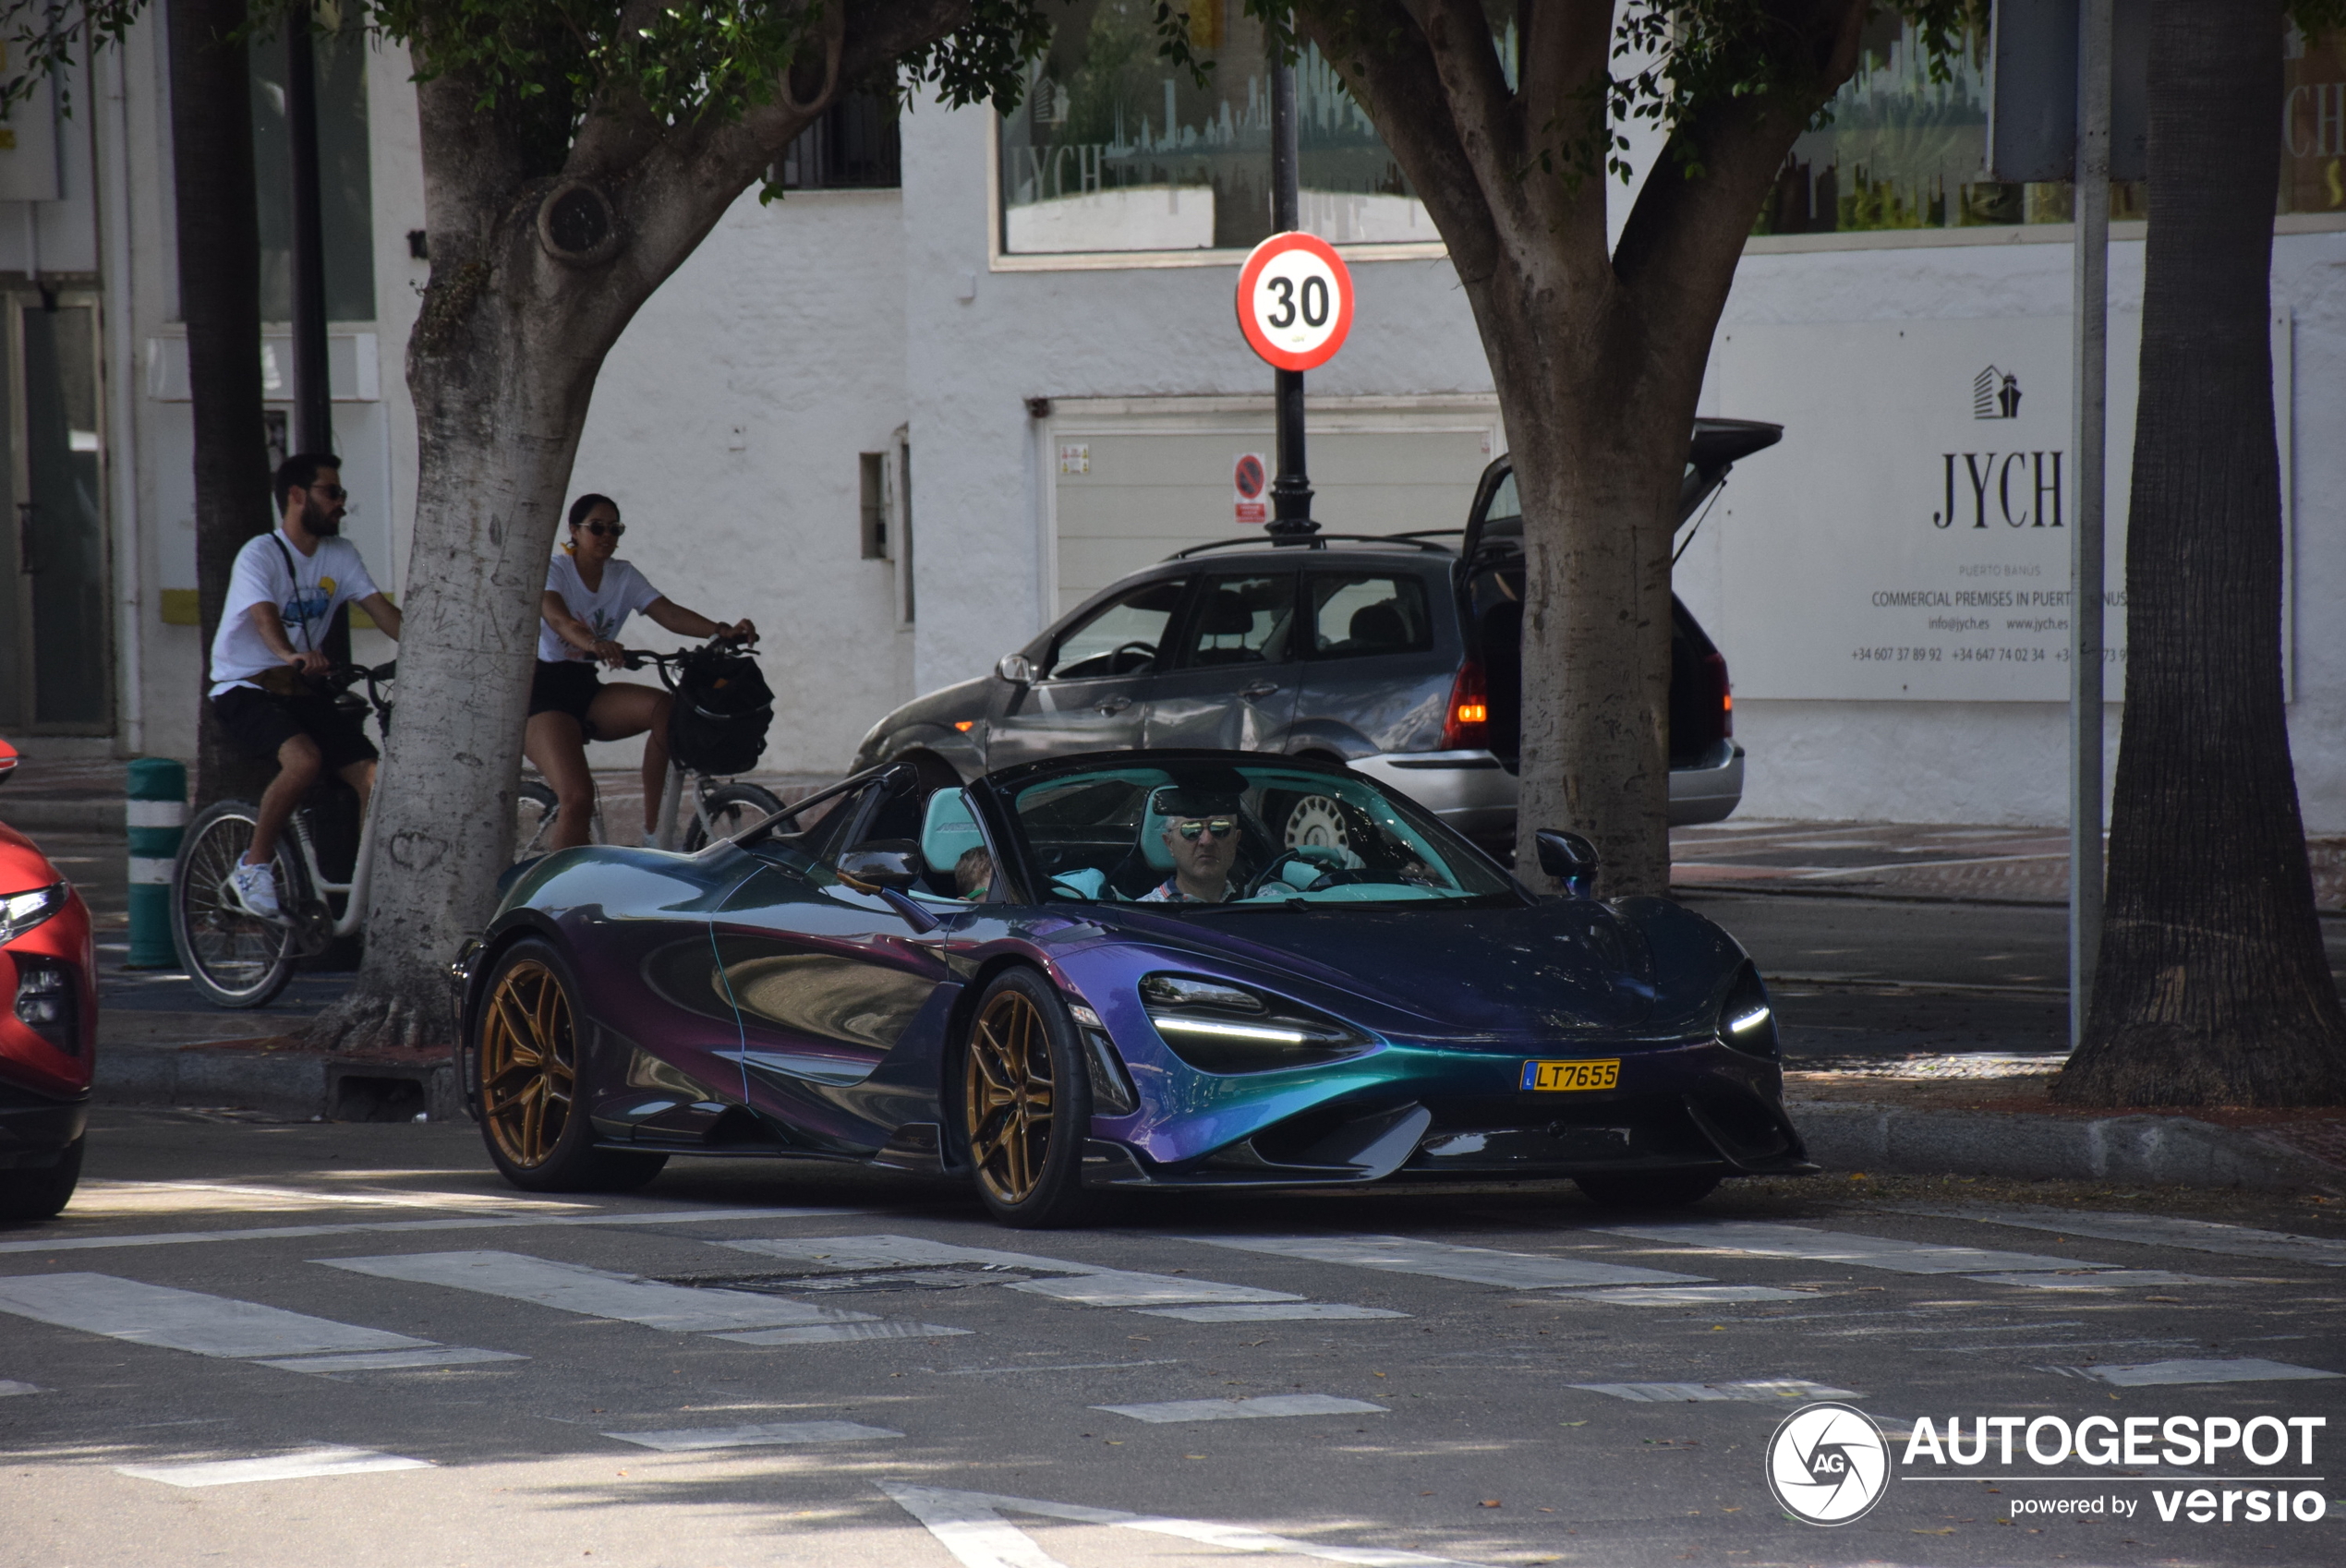 A very special 765LT Spider shows up in Marbella